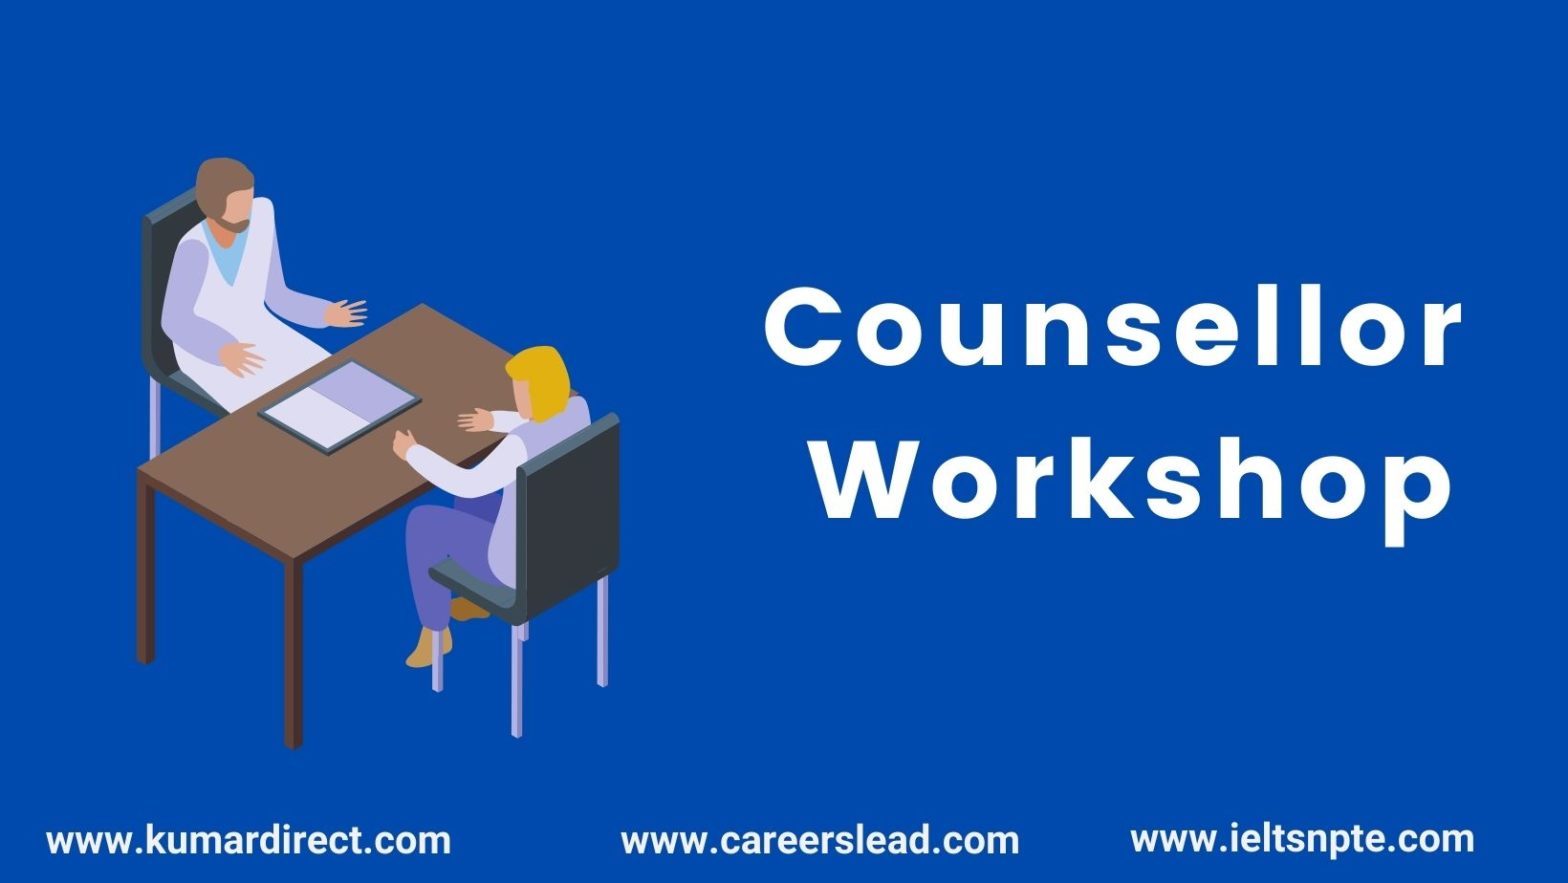 Counsellor Workshop